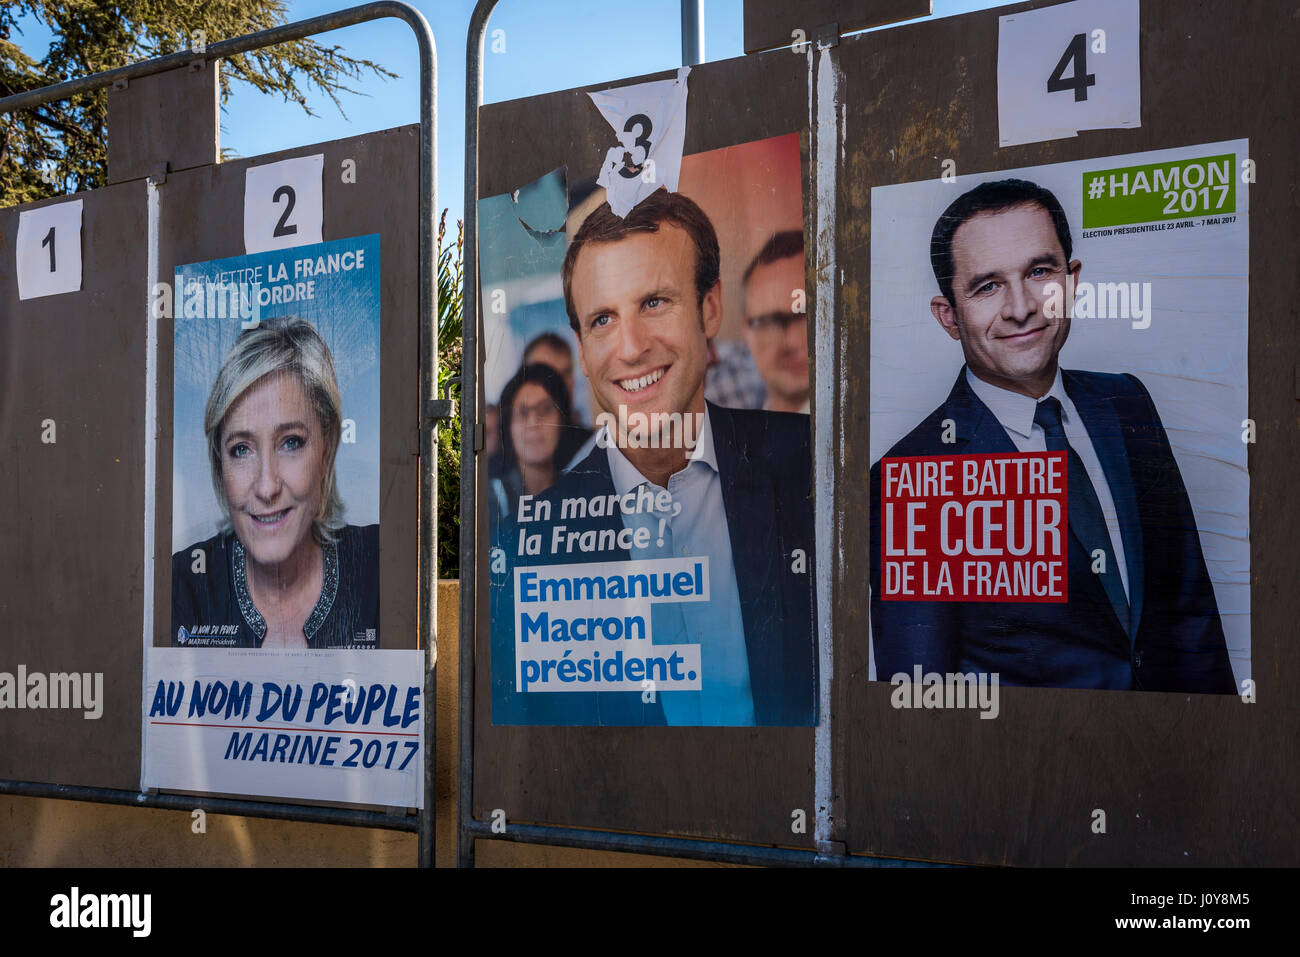 posters of french presidential elections  candidates of Benoit Hamon, Emmanuel Macron and Marine le Pen. Stock Photo